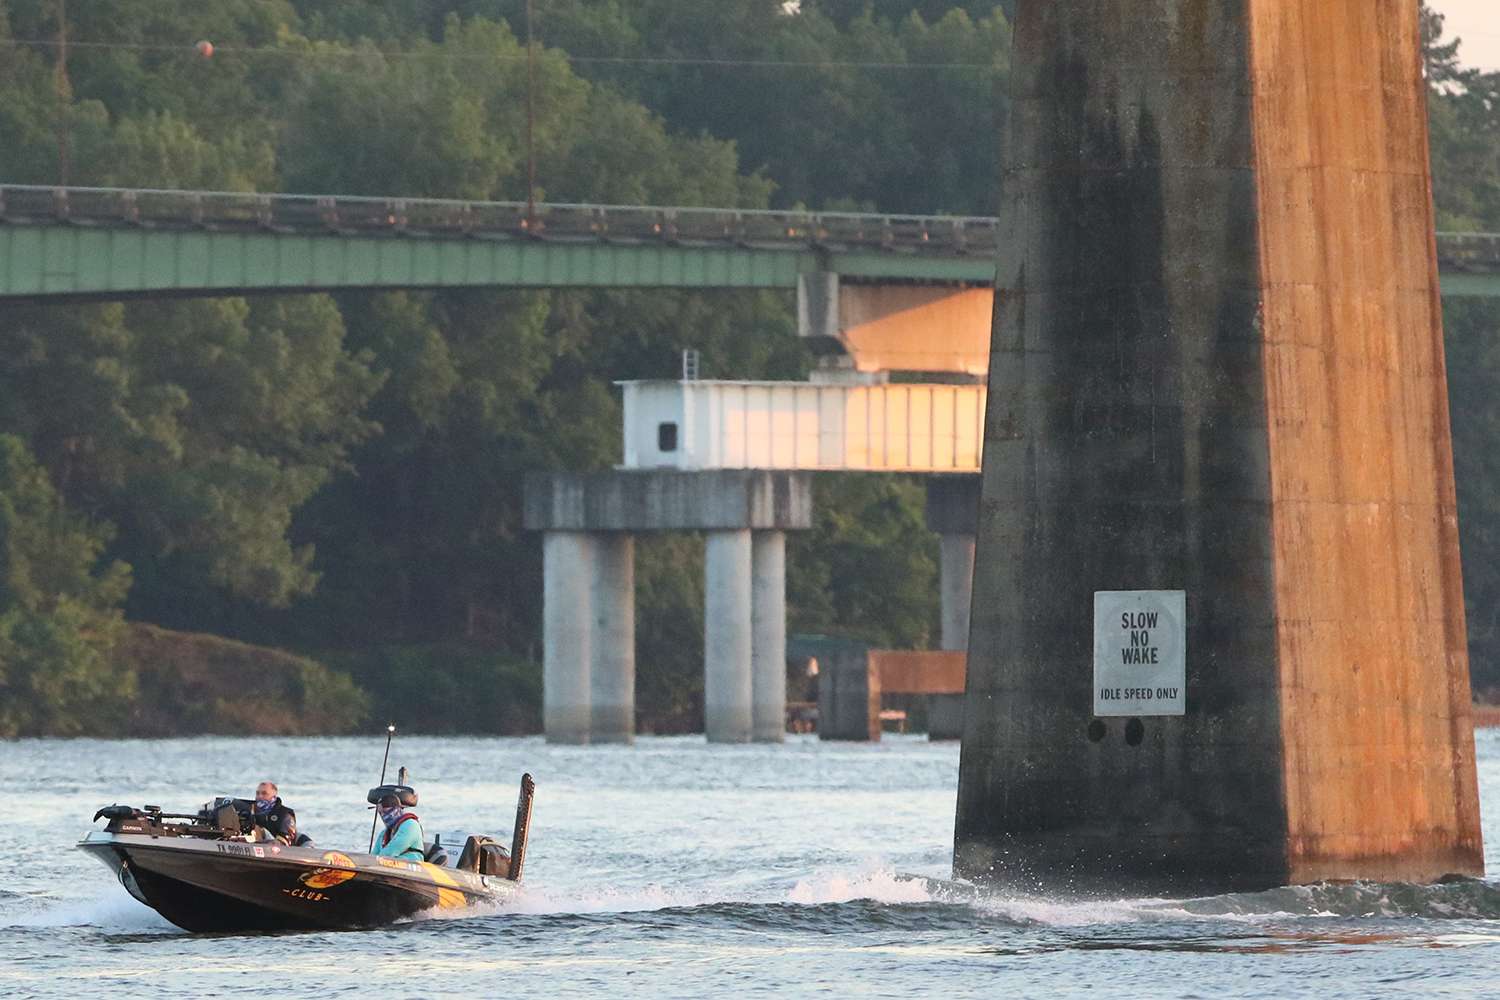 Follow tournament veteran Clark Wendlandt as he gathers a quality limit early during the second morning of the 2020 DeWalt Bassmaster Elite at Lake Eufaula.